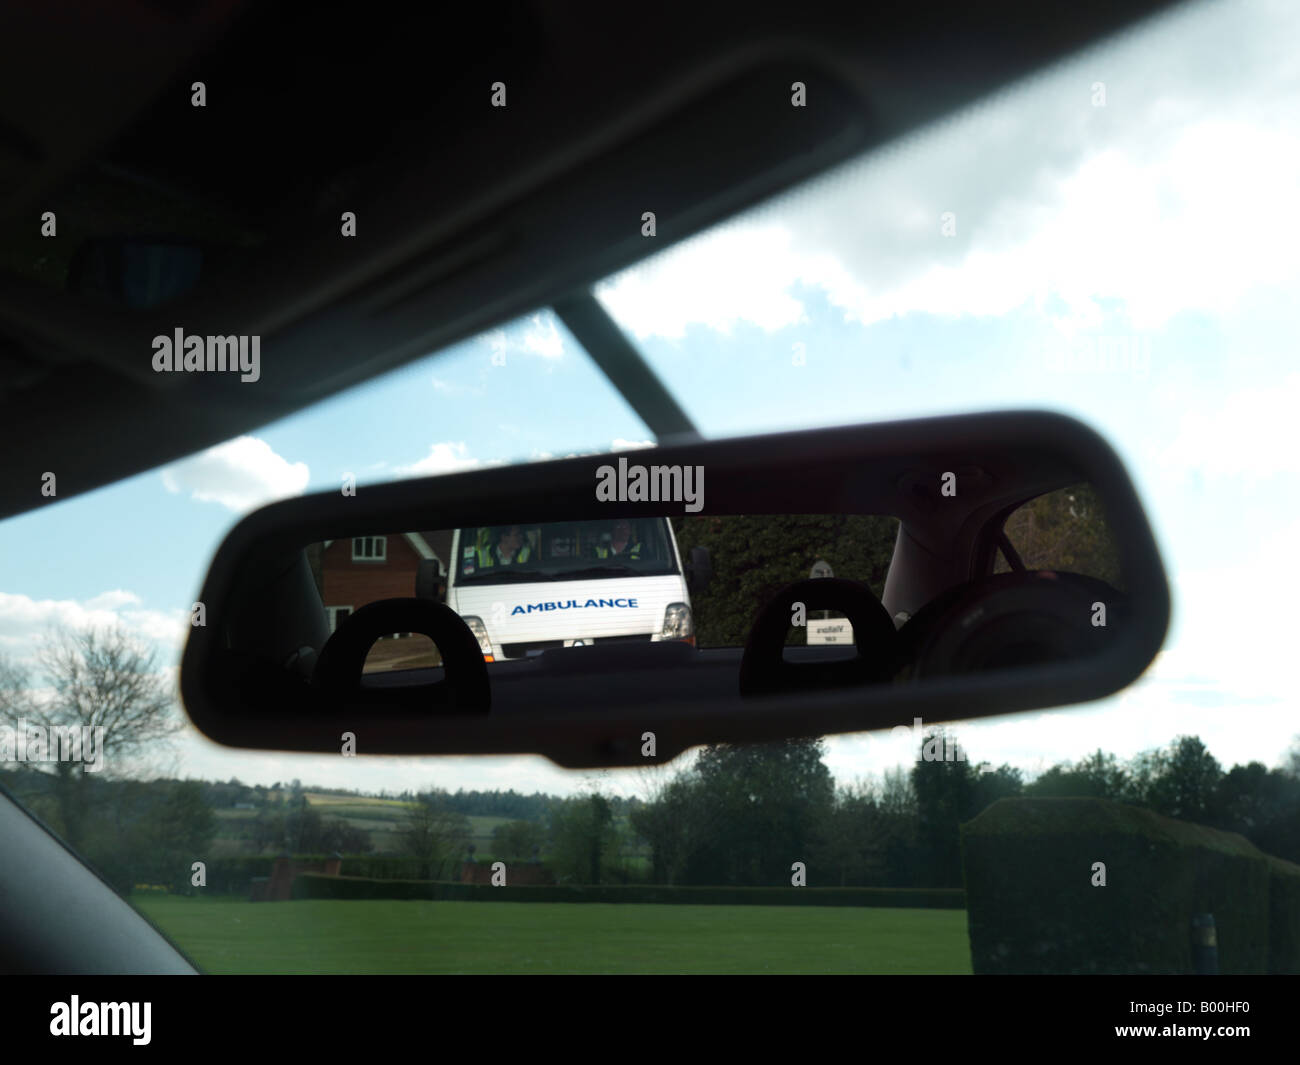 Ambulance seen from a rear View Mirror of a Car Showing Reversed Writing Stock Photo